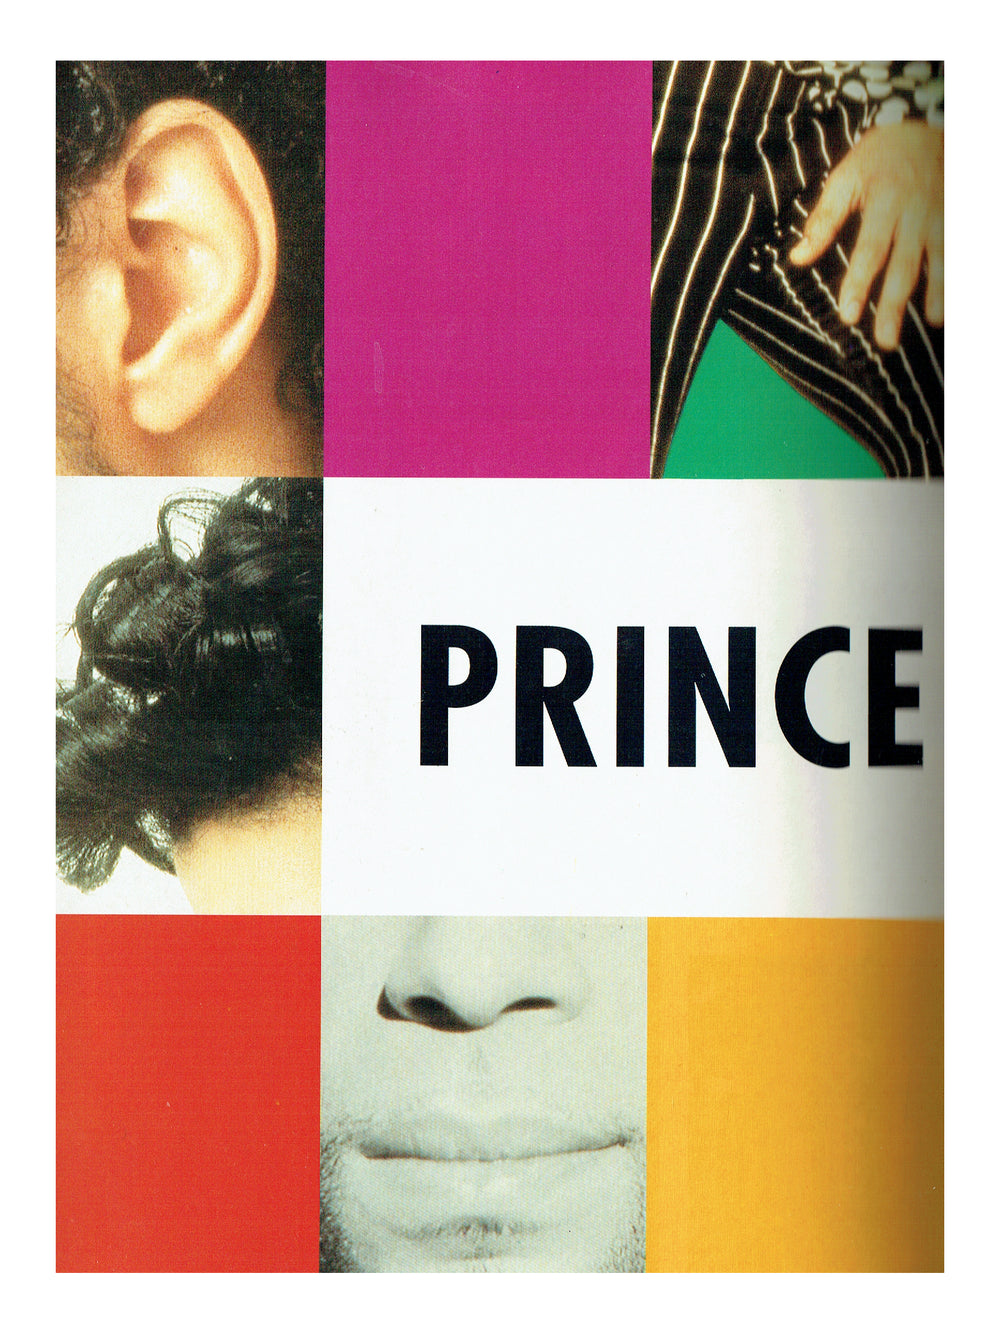 Prince – The Face UK Magazine December 1991 Prince Speaks 7 Page Article